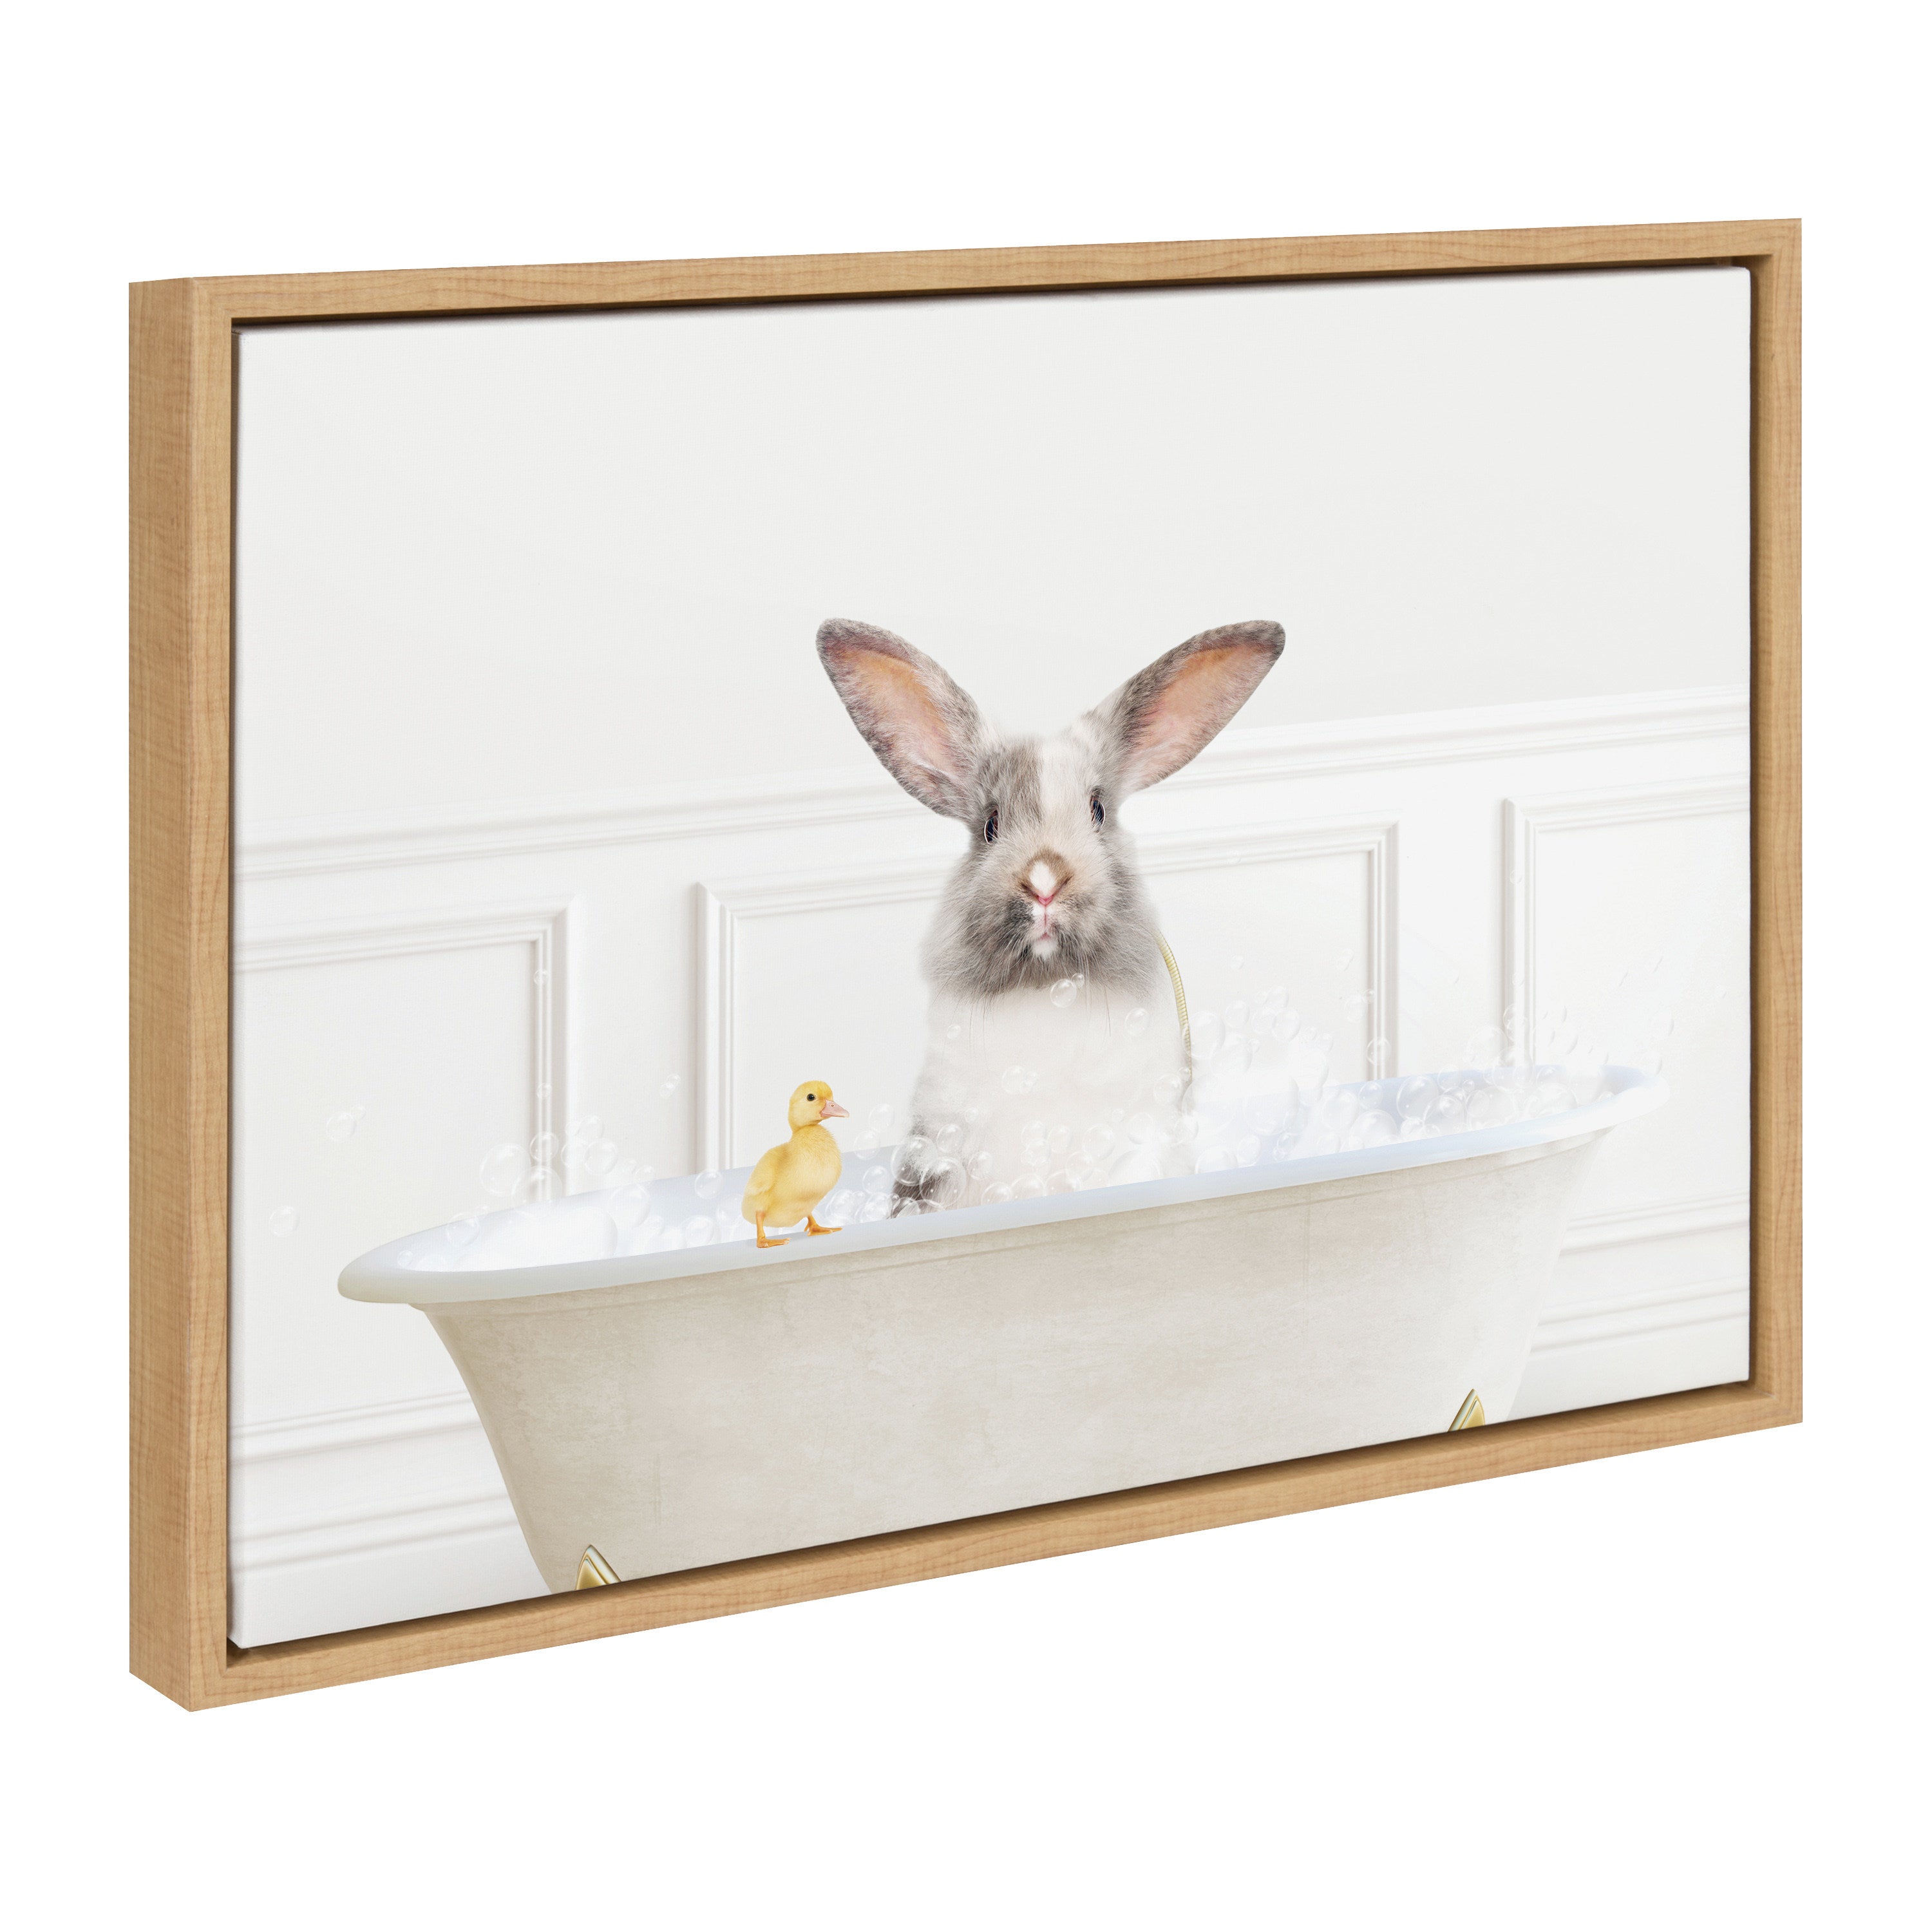 Sylvie Bunny In Bubble Bath Neutral Style Framed Canvas by Amy Peterson Art Studio